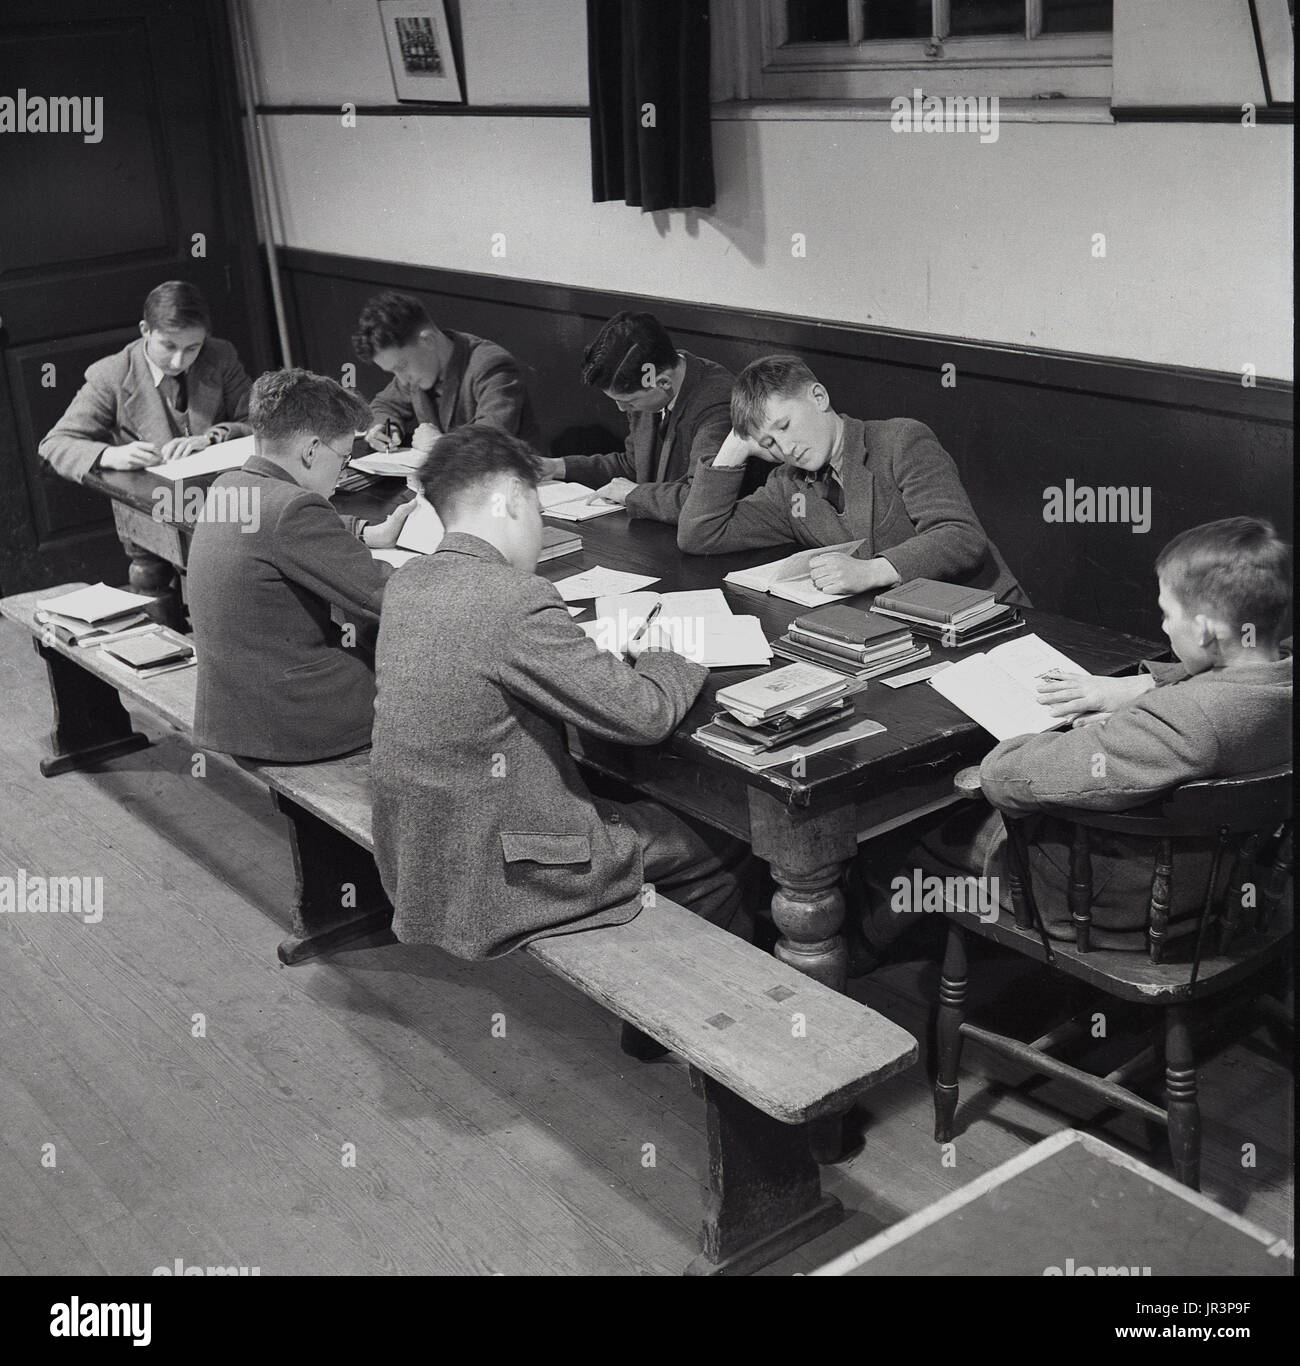 1948, England, UK, historical picture, shows a group of boys in jacket and ties doing ther prep or after class homework togther at a table at Haileybury Publlic School, a traditional English boys' boarding school. Stock Photo